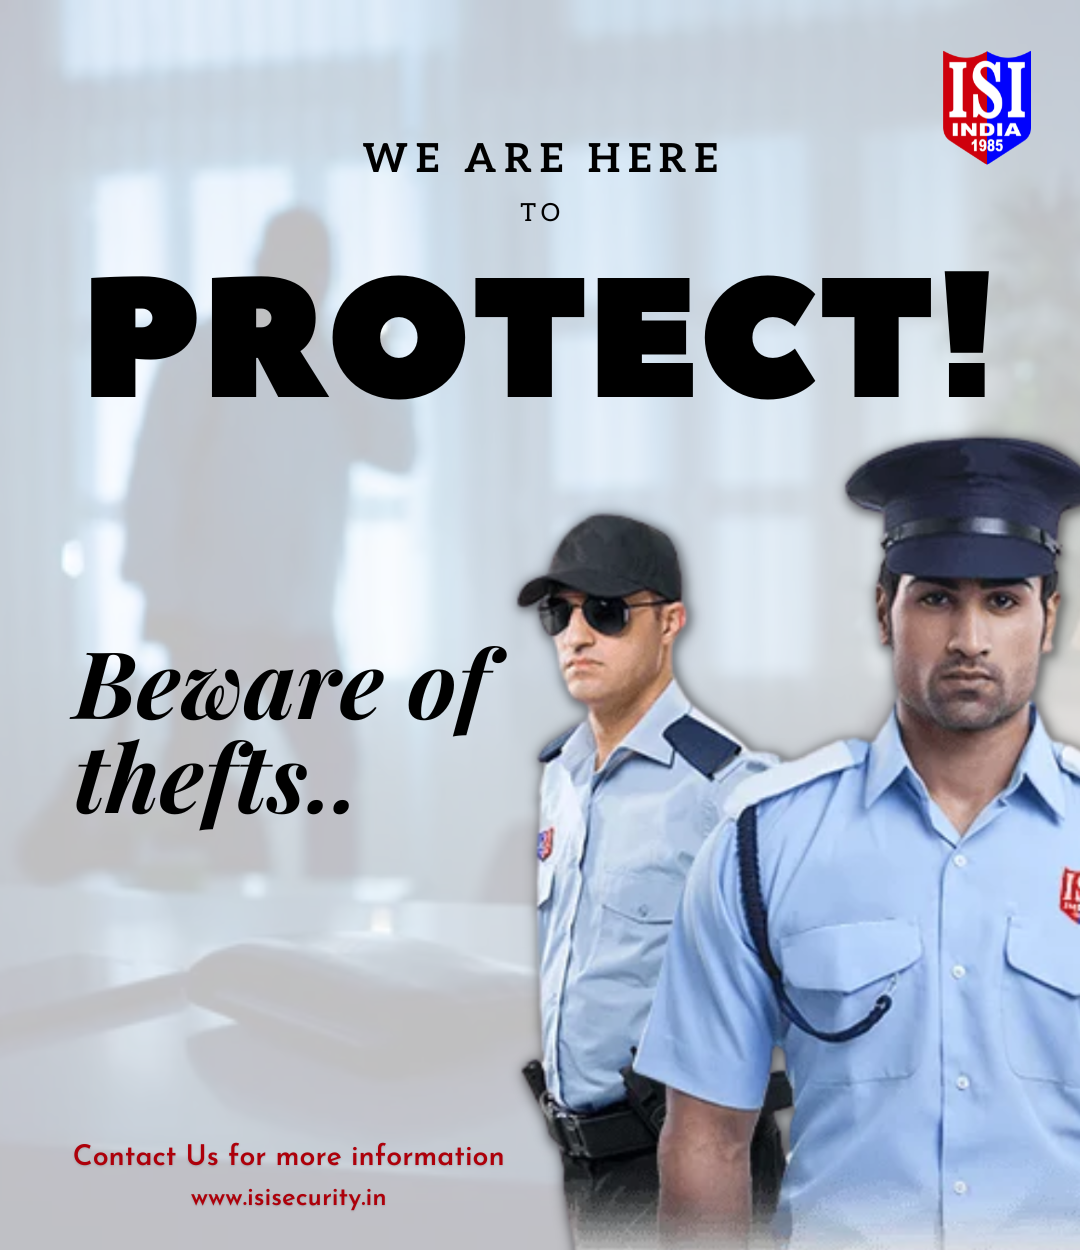 Security Services in India